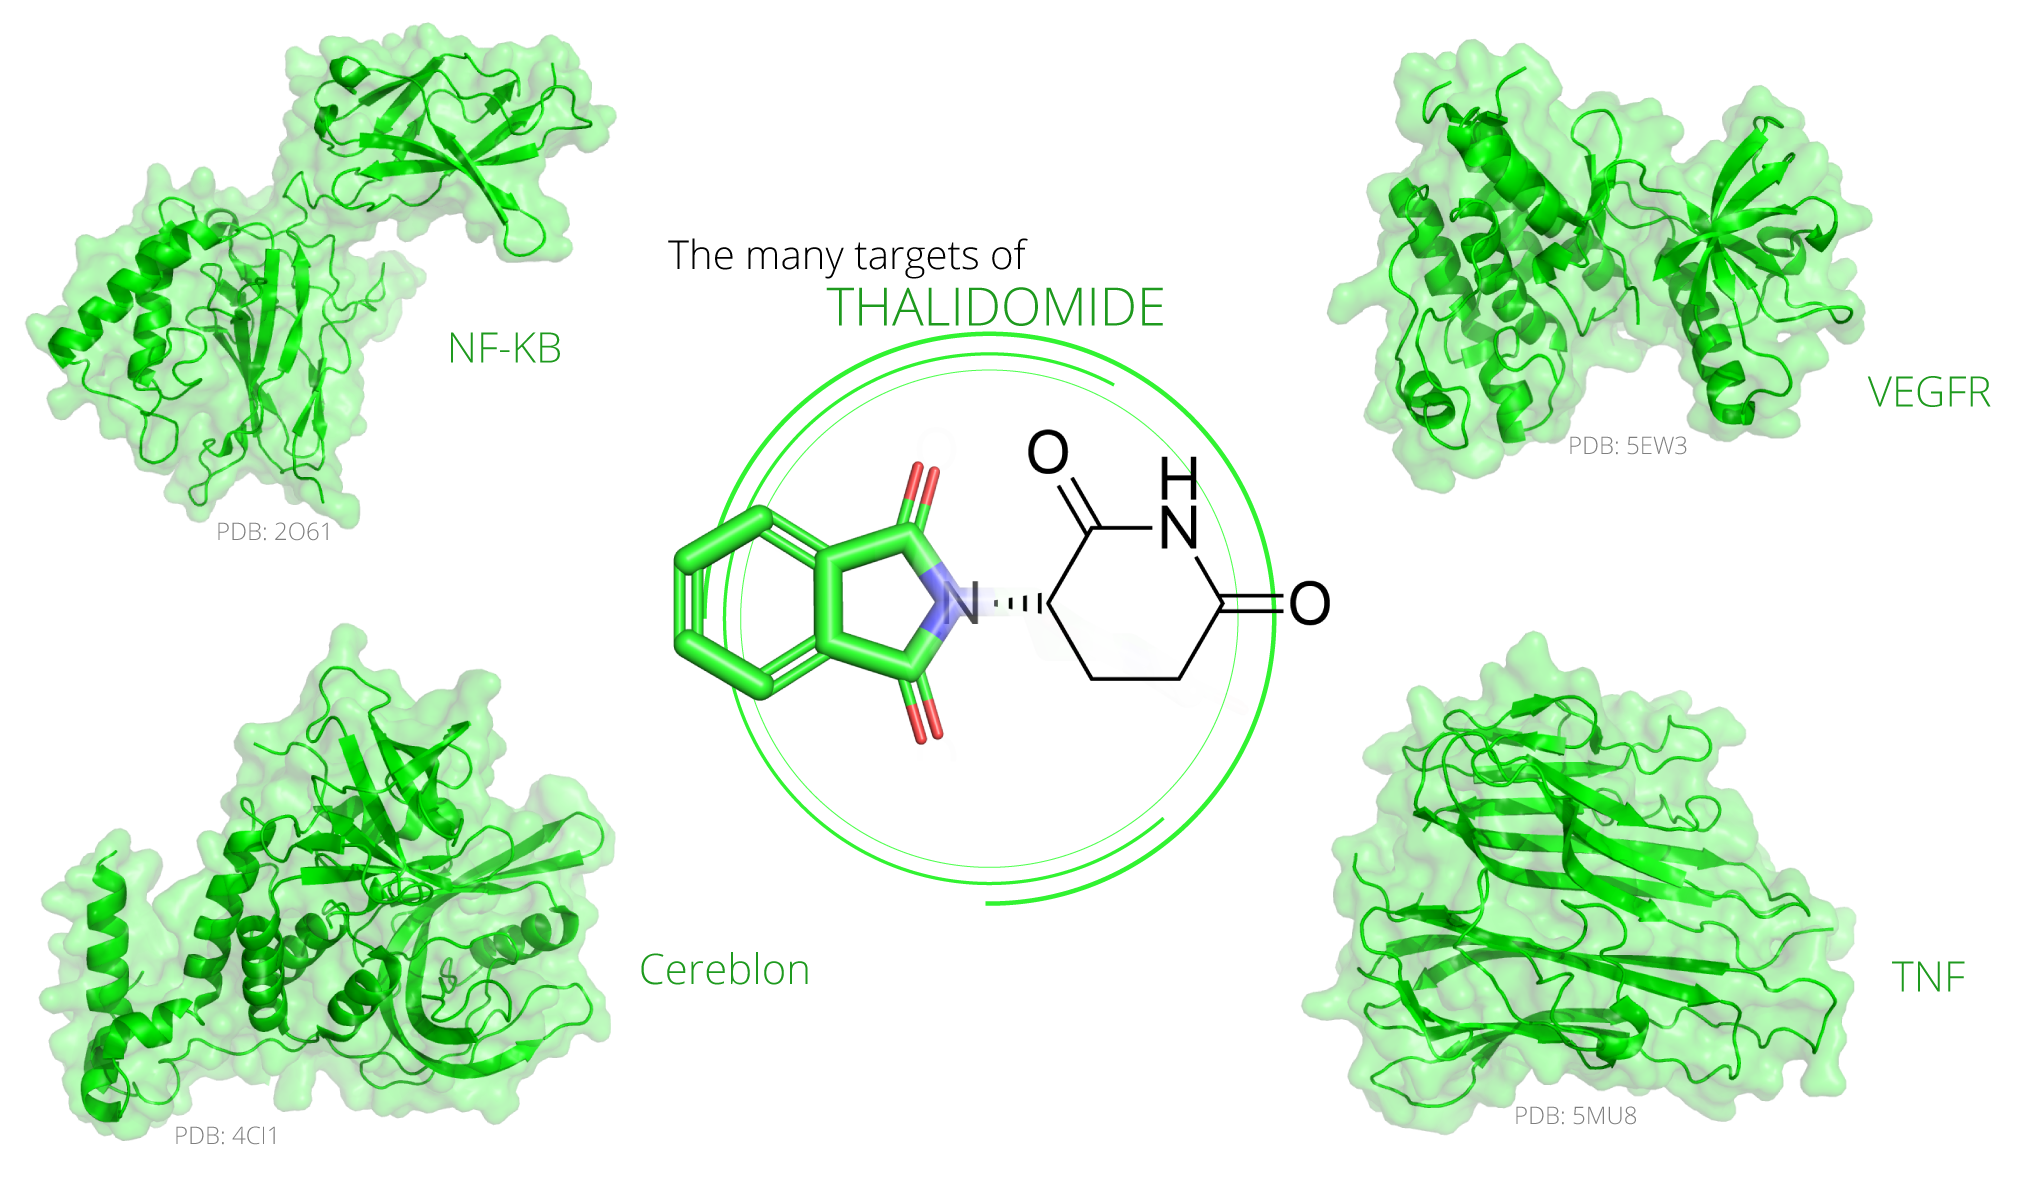 Figure 1.&nbsp;Thalidomide acts on several proteins through direct binding or on pathway. Relevant drug targets include NF-κB, Cereblon, VEGFR, and TNF-α.